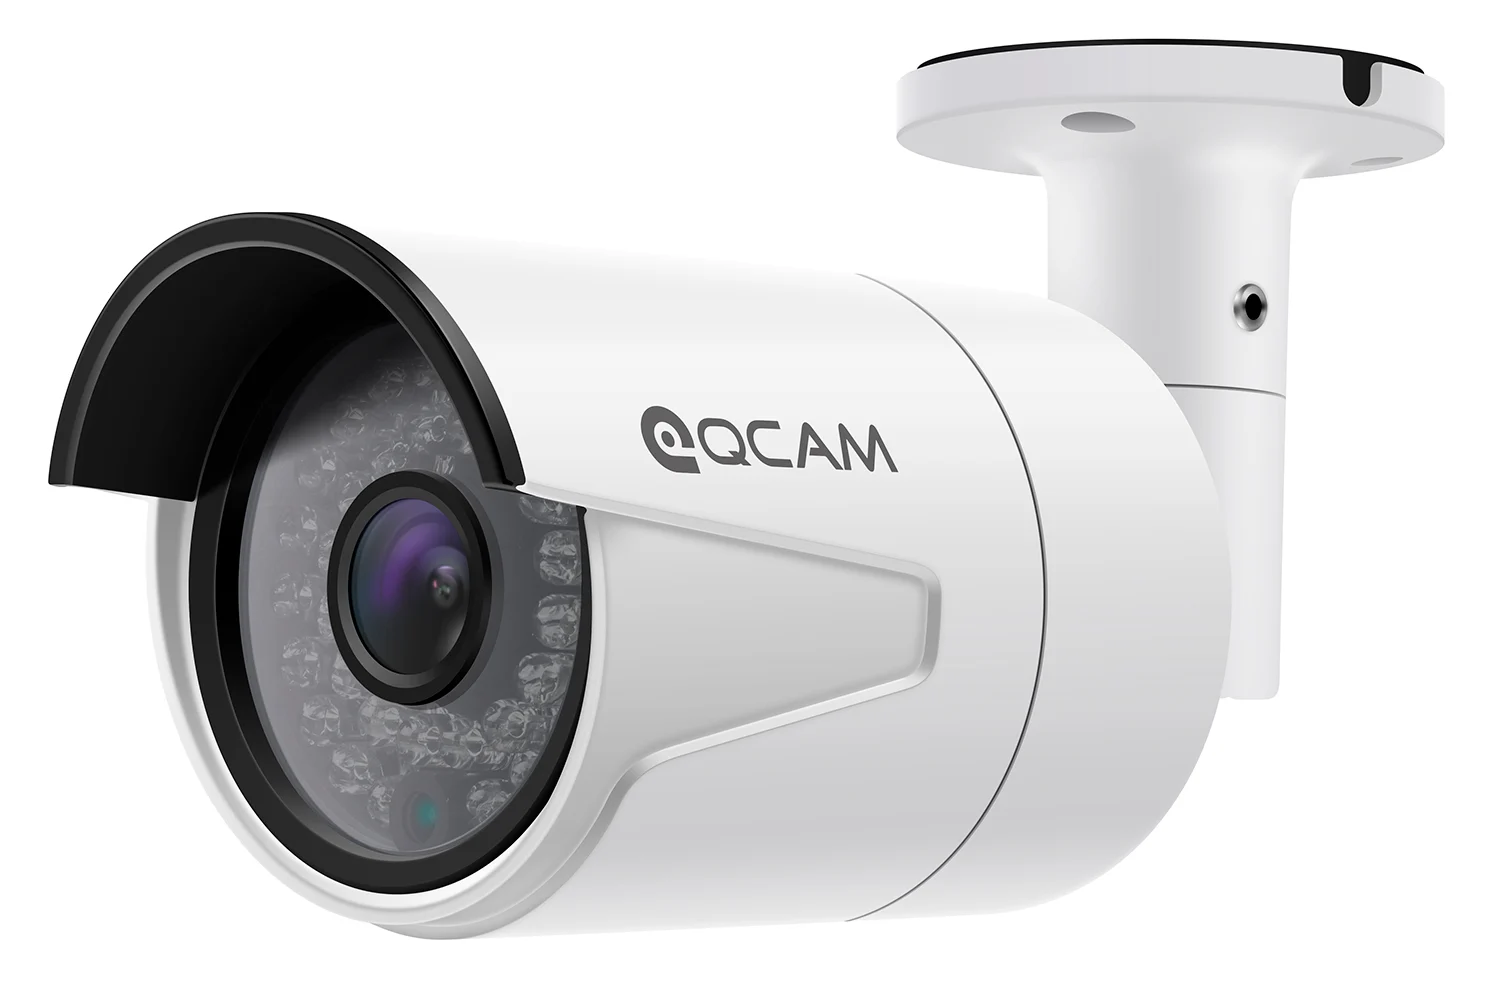 Qcam approved CCTV